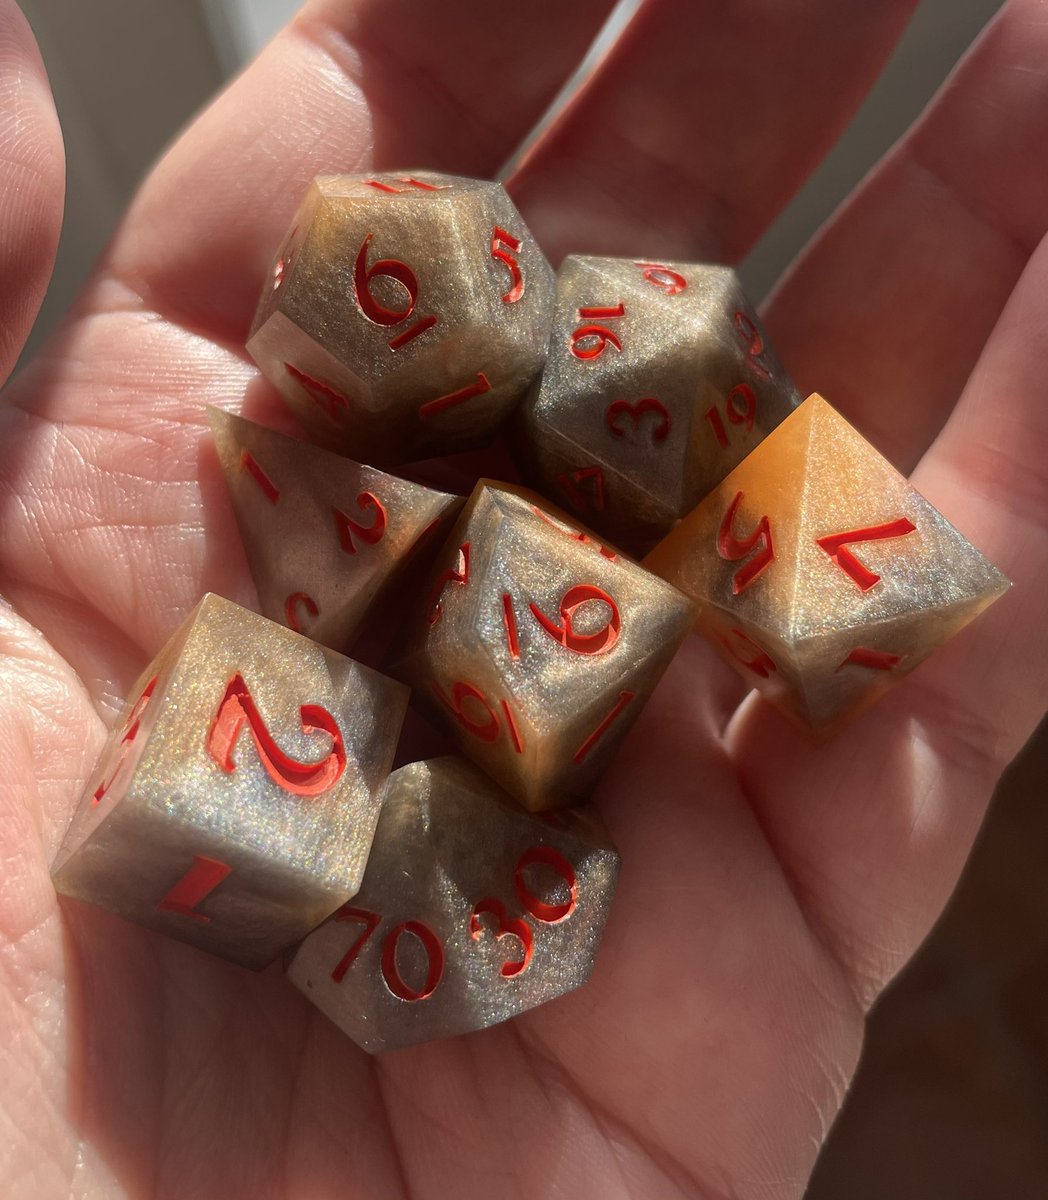 Bring out your inner beast with these Inner Tiger Dice. Available on my Etsy shop!
FoxGamingau.Etsy.com
#dice #dicemaking #dnd #dnd5e #dungeonsanddragons #rpg #ttrpg #roleplaygame #epoxyresin #homemade #handmade #handmadedice #tabletop #tabletopgames #pathfinder #etsy #tiger